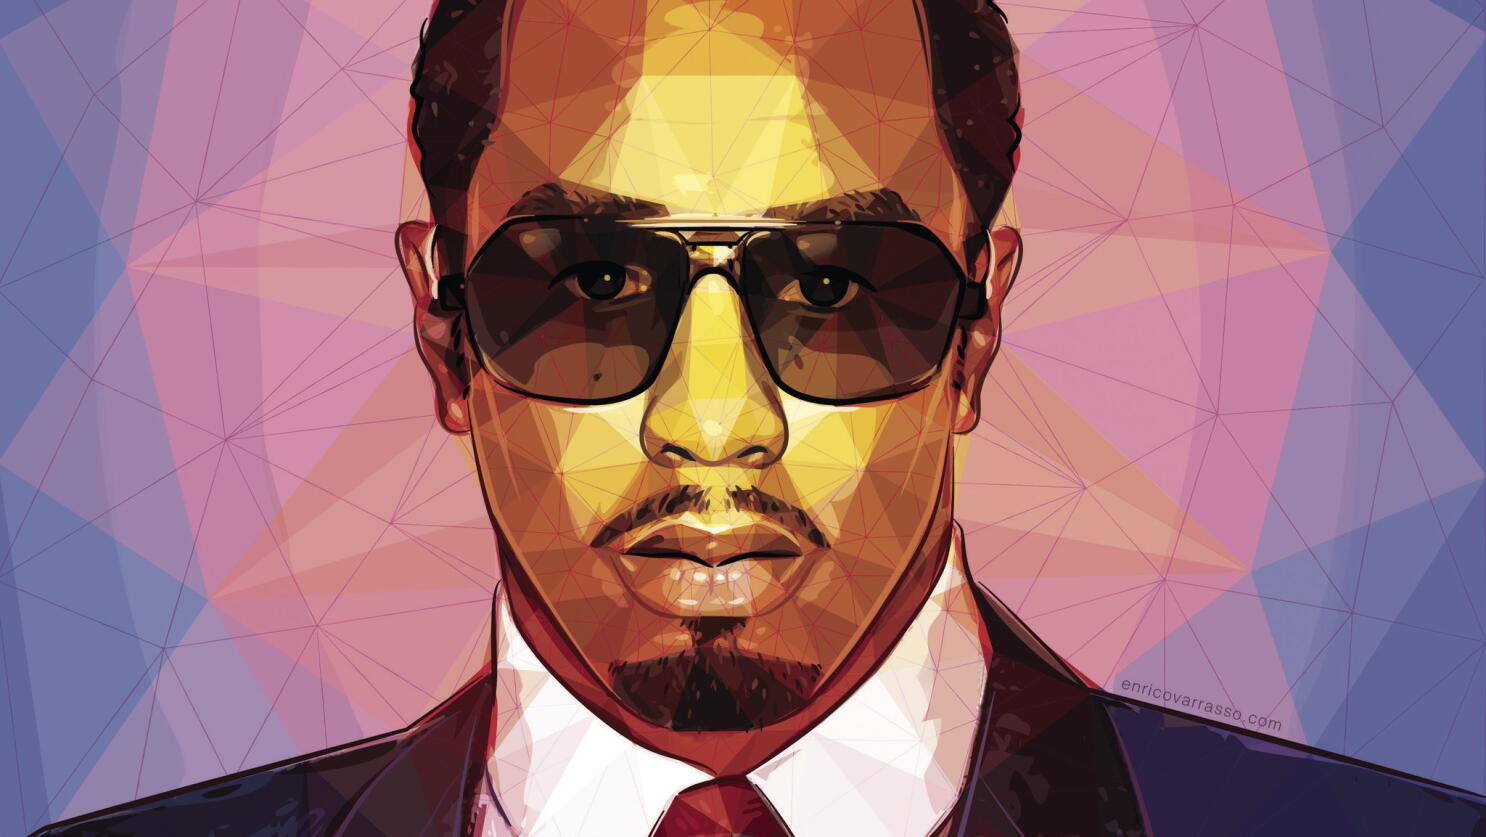 Sean Combs Back to Puff Daddy With Upcoming Album – Billboard